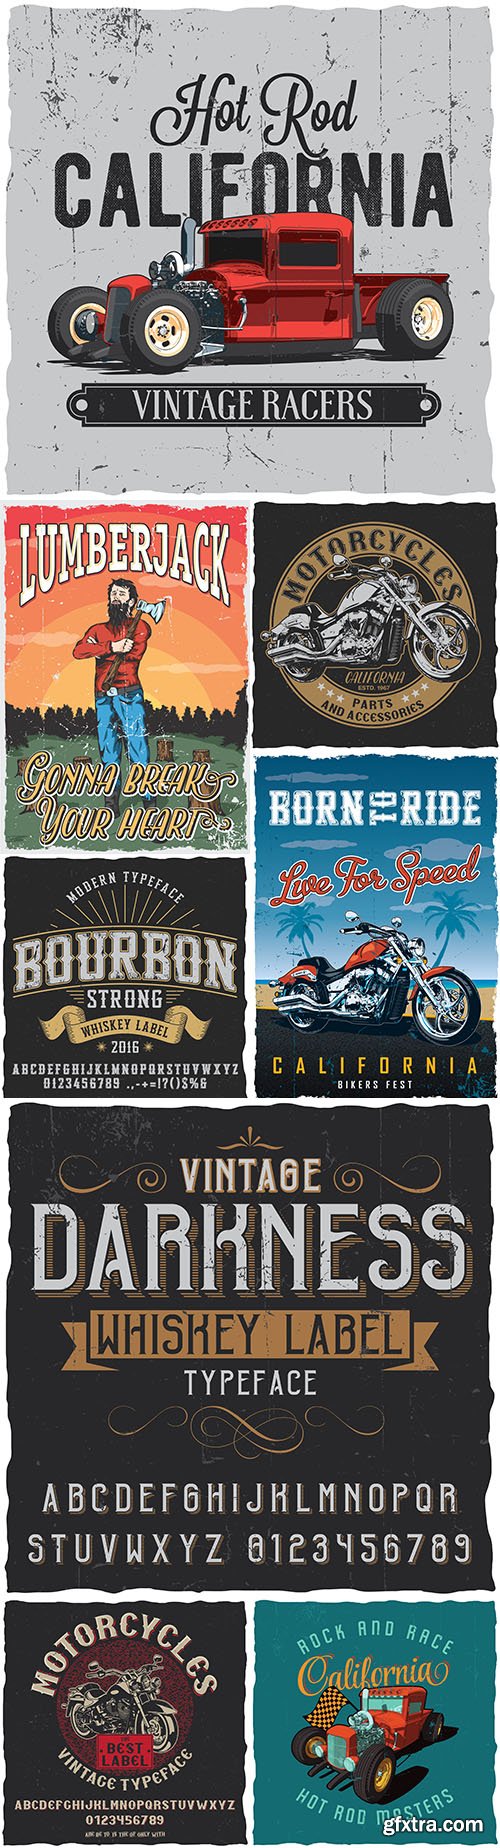 Vintage poster with details and accessories of motorcycles for T-shirtsxA;